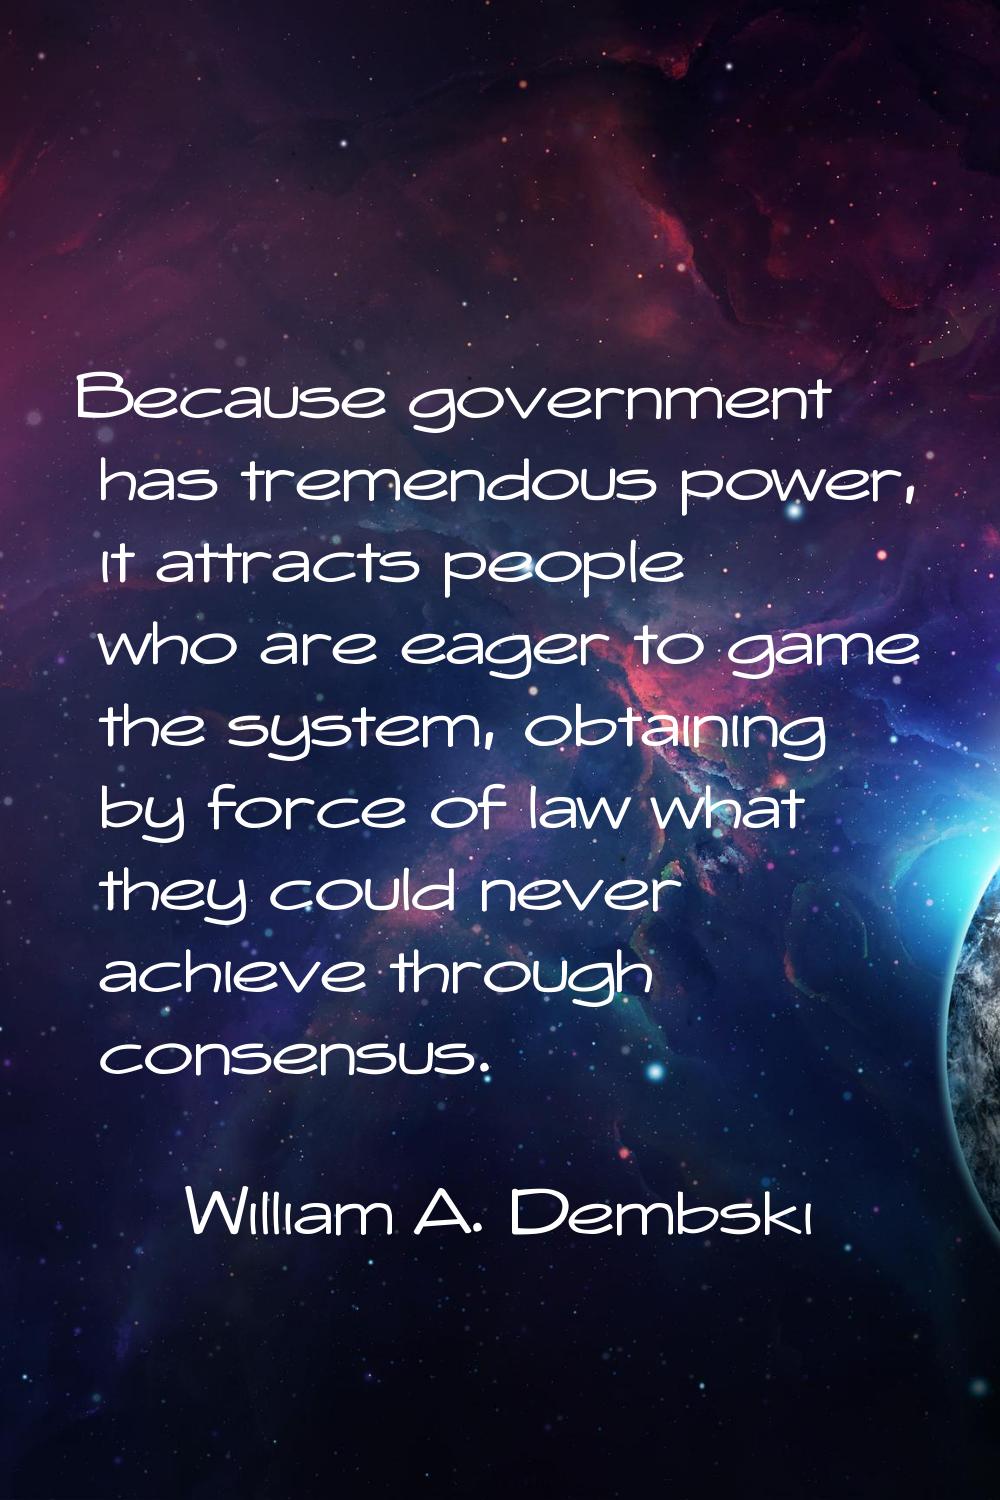 Because government has tremendous power, it attracts people who are eager to game the system, obtai